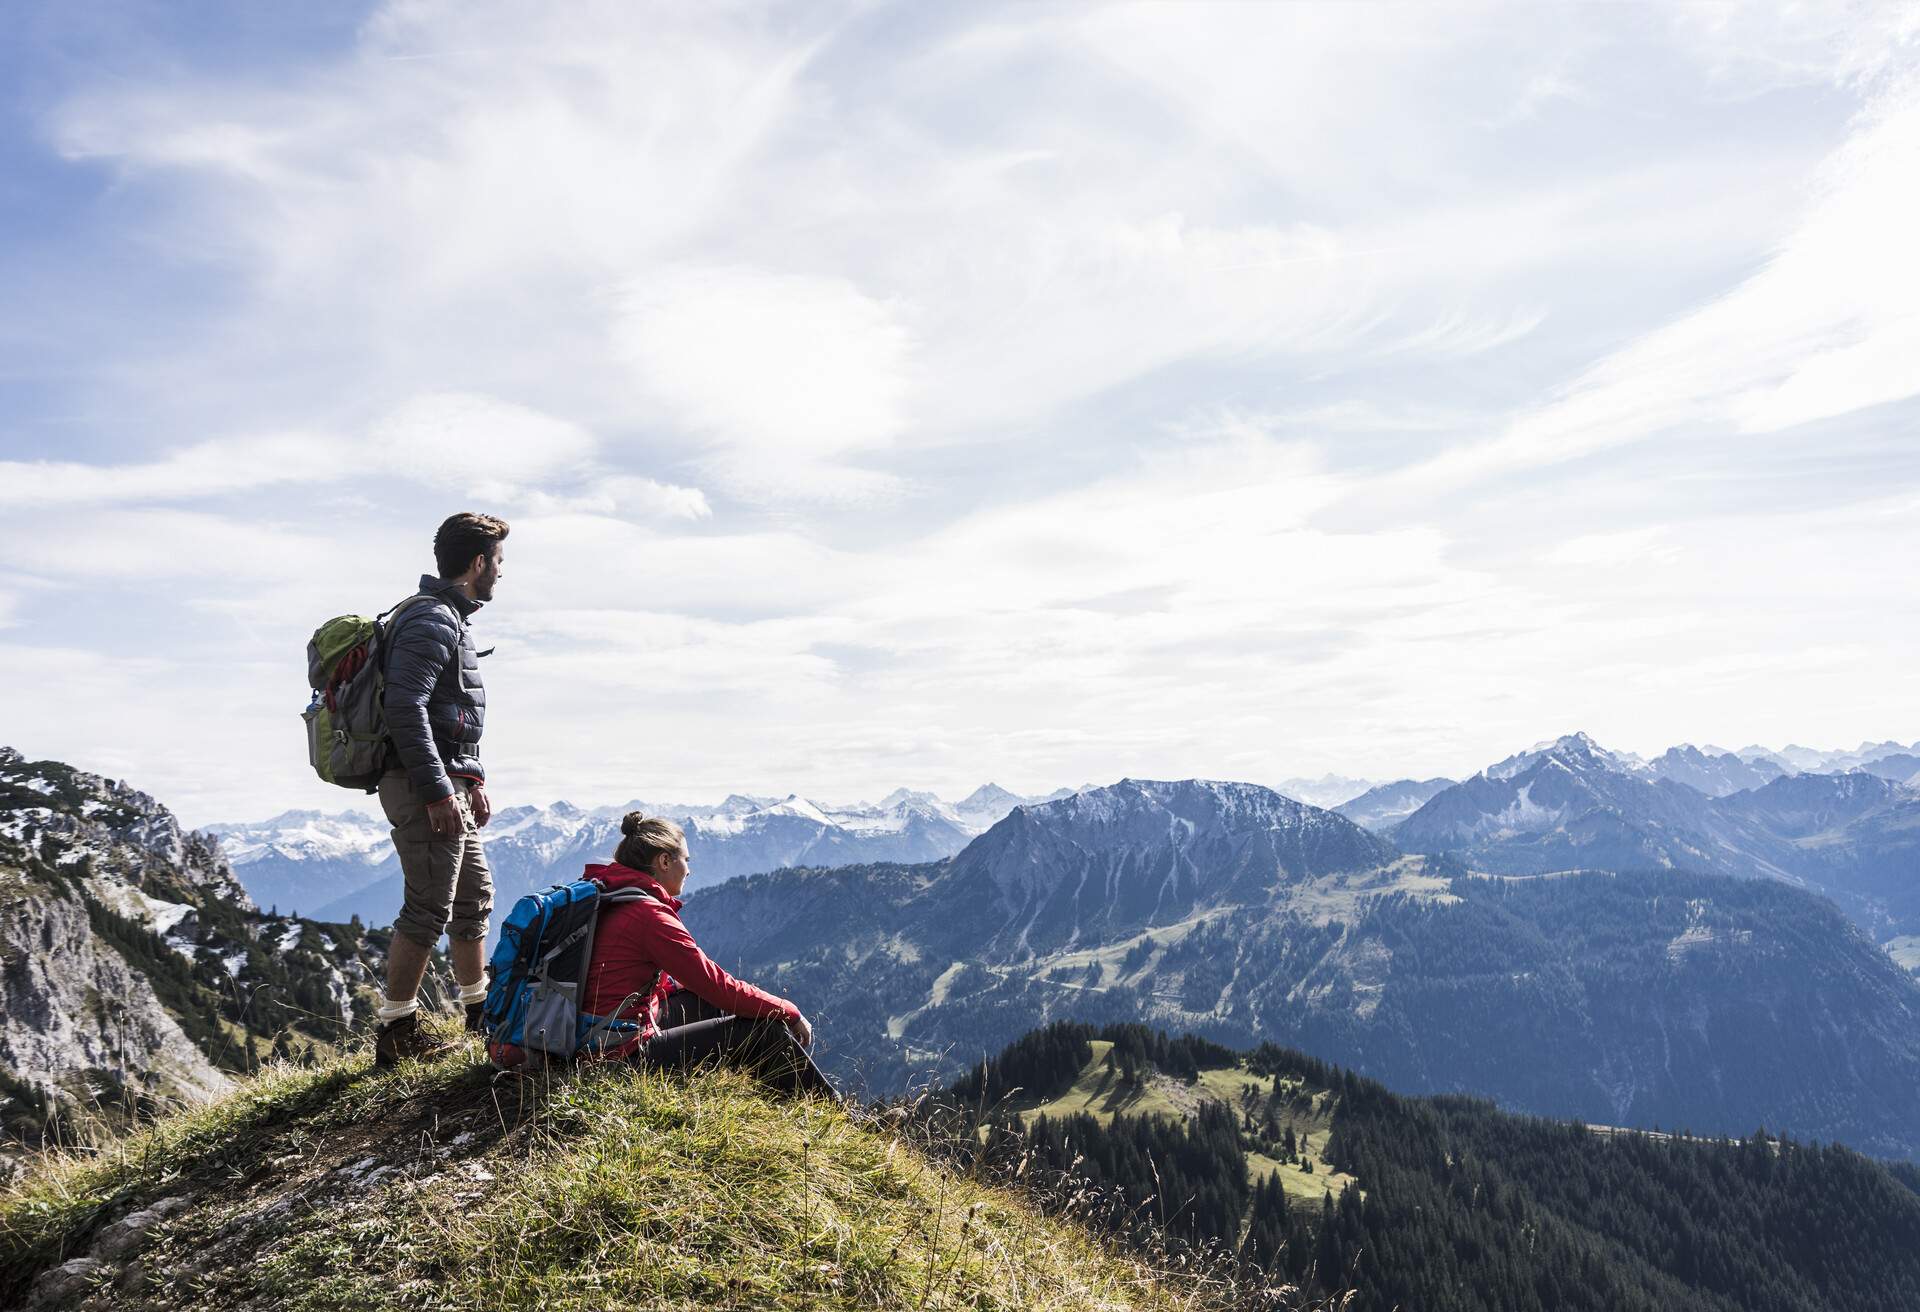 austria_tyrol_hiking_mountain_nature_people_gettyimages